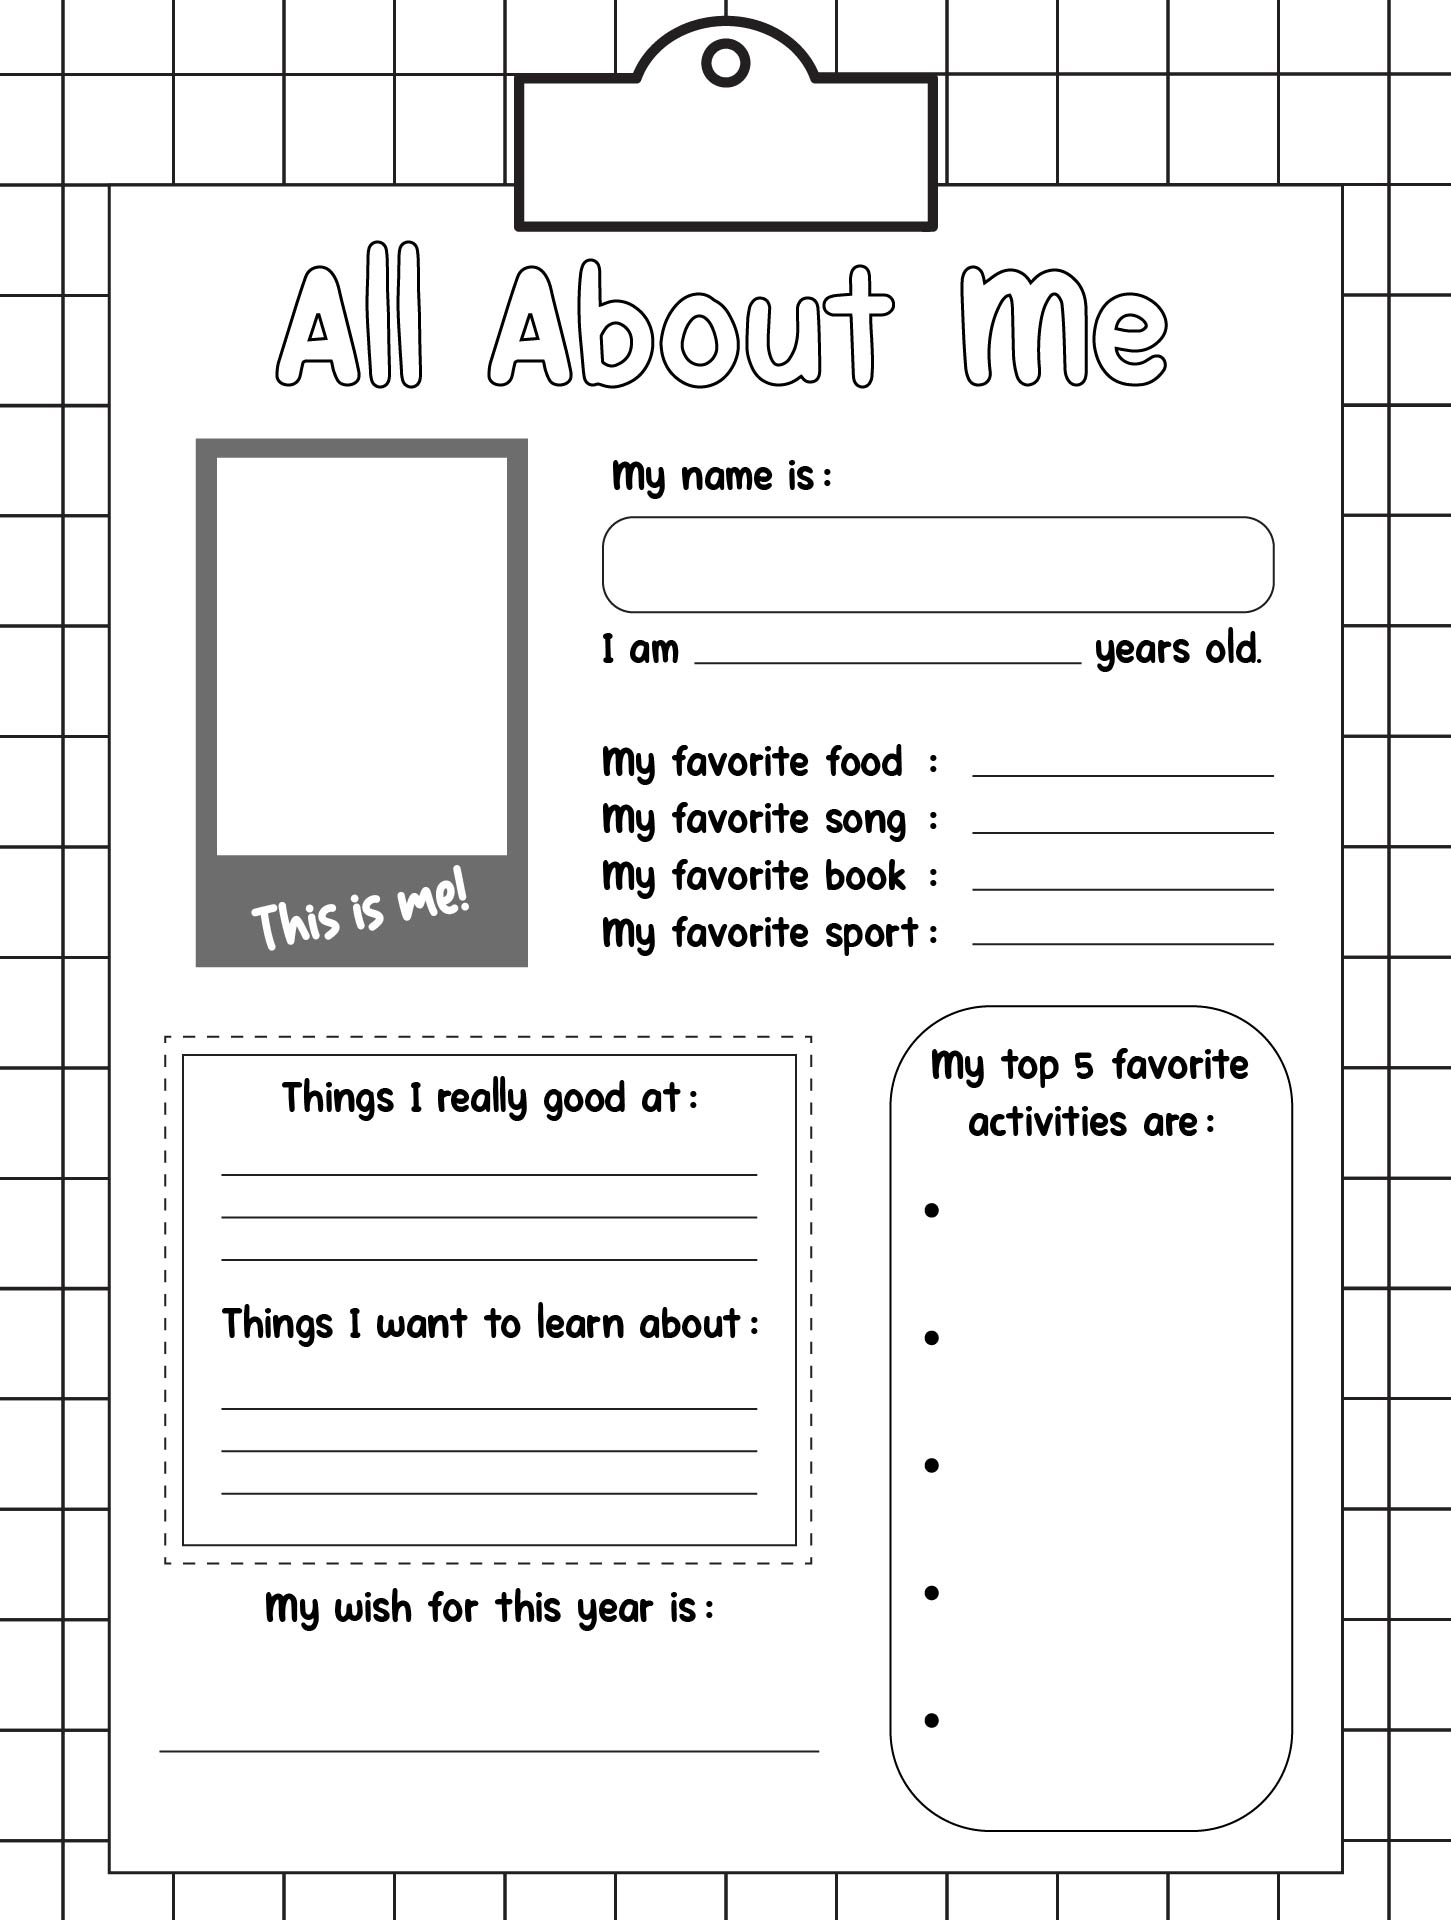 Printable Fill-in-the-Blank Template All About Me